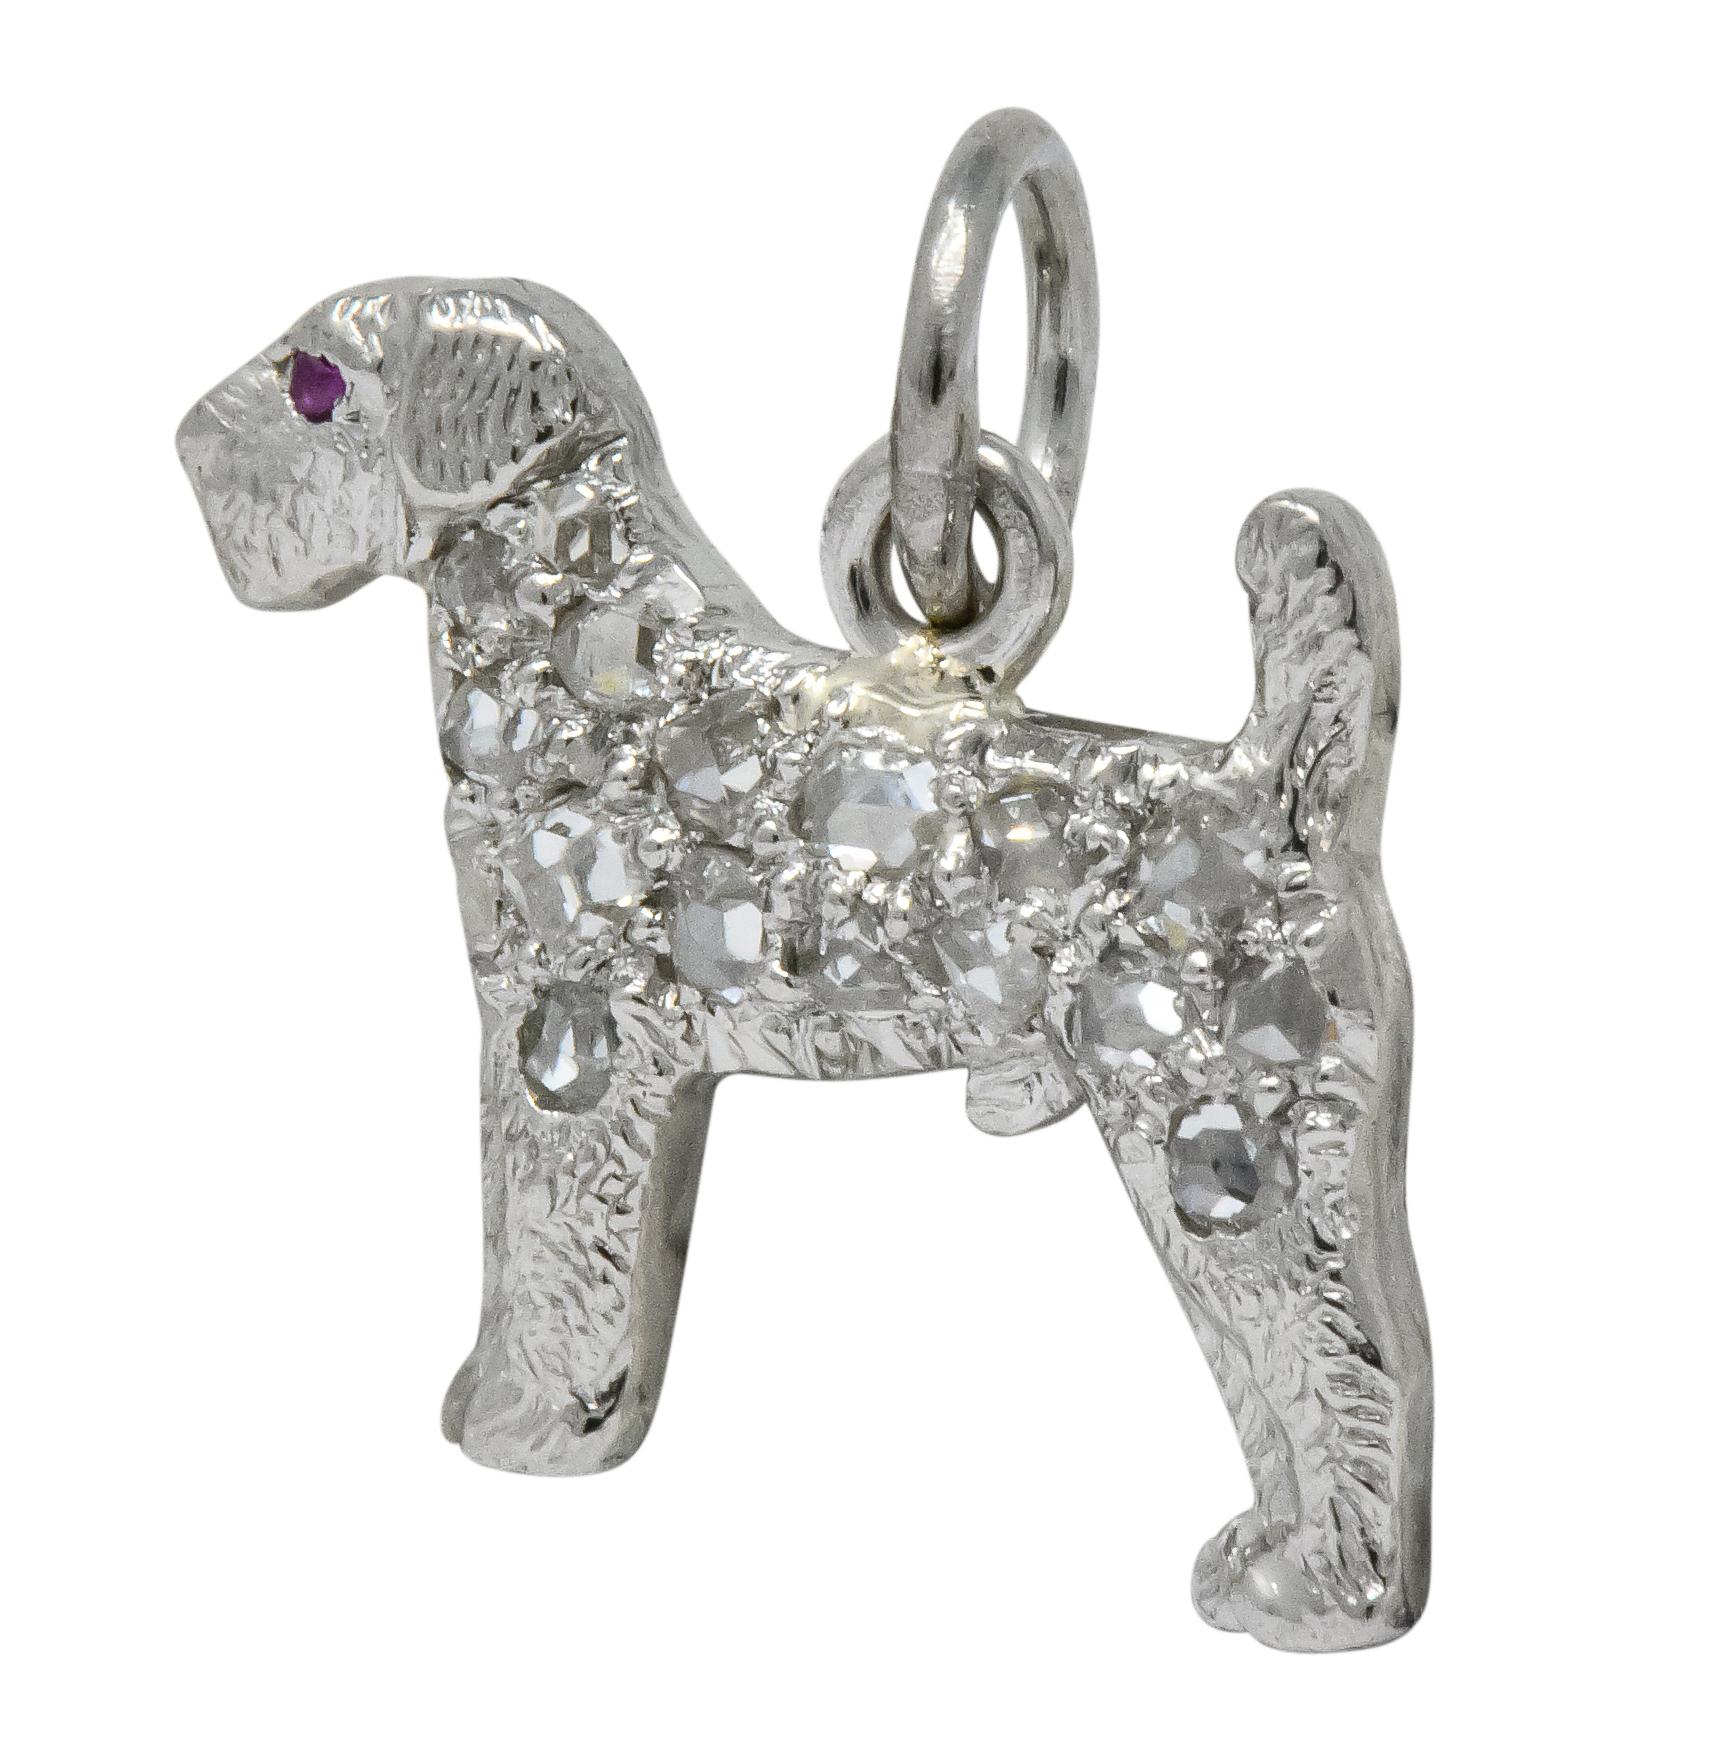 Dog charm with detailed fur texture and pavé set throughout with rose cut diamonds and small round cut ruby eye

Completed by jump ring

Signed J.E.C & Co for J.E. Caldwell

Tested as platinum

Circa 1920

Measures: approx. 1/2 x 1/2 (including